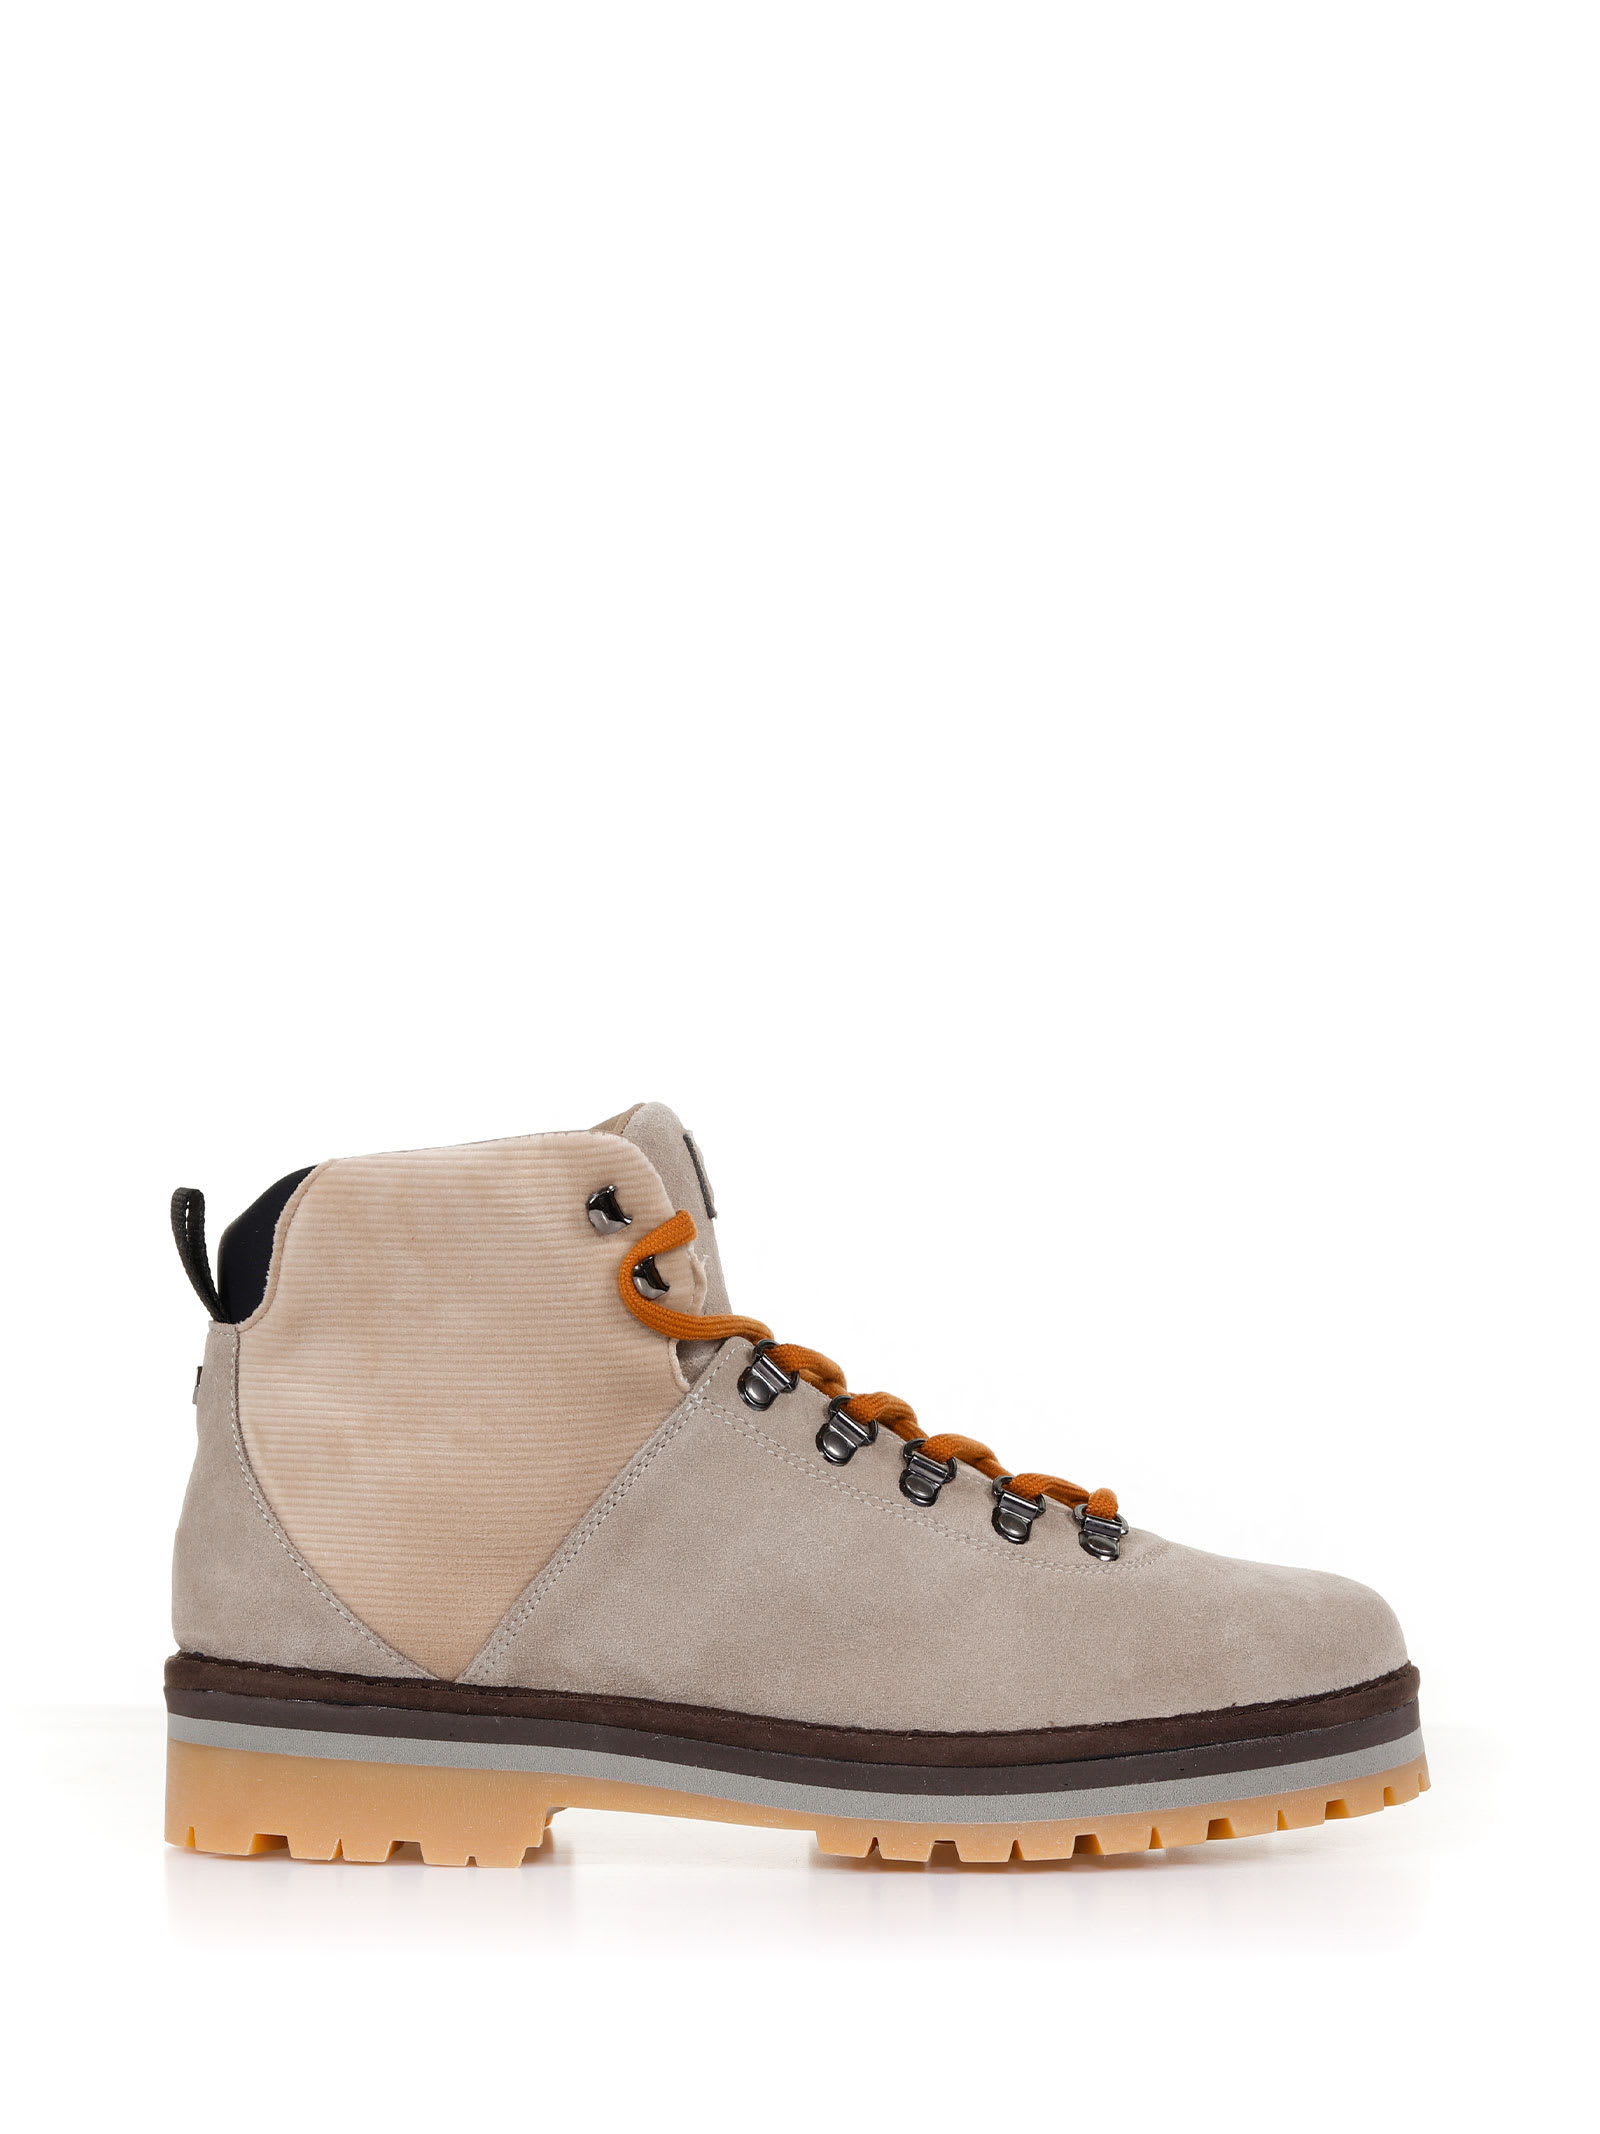 Panchic P09 Suede Hiking Boots